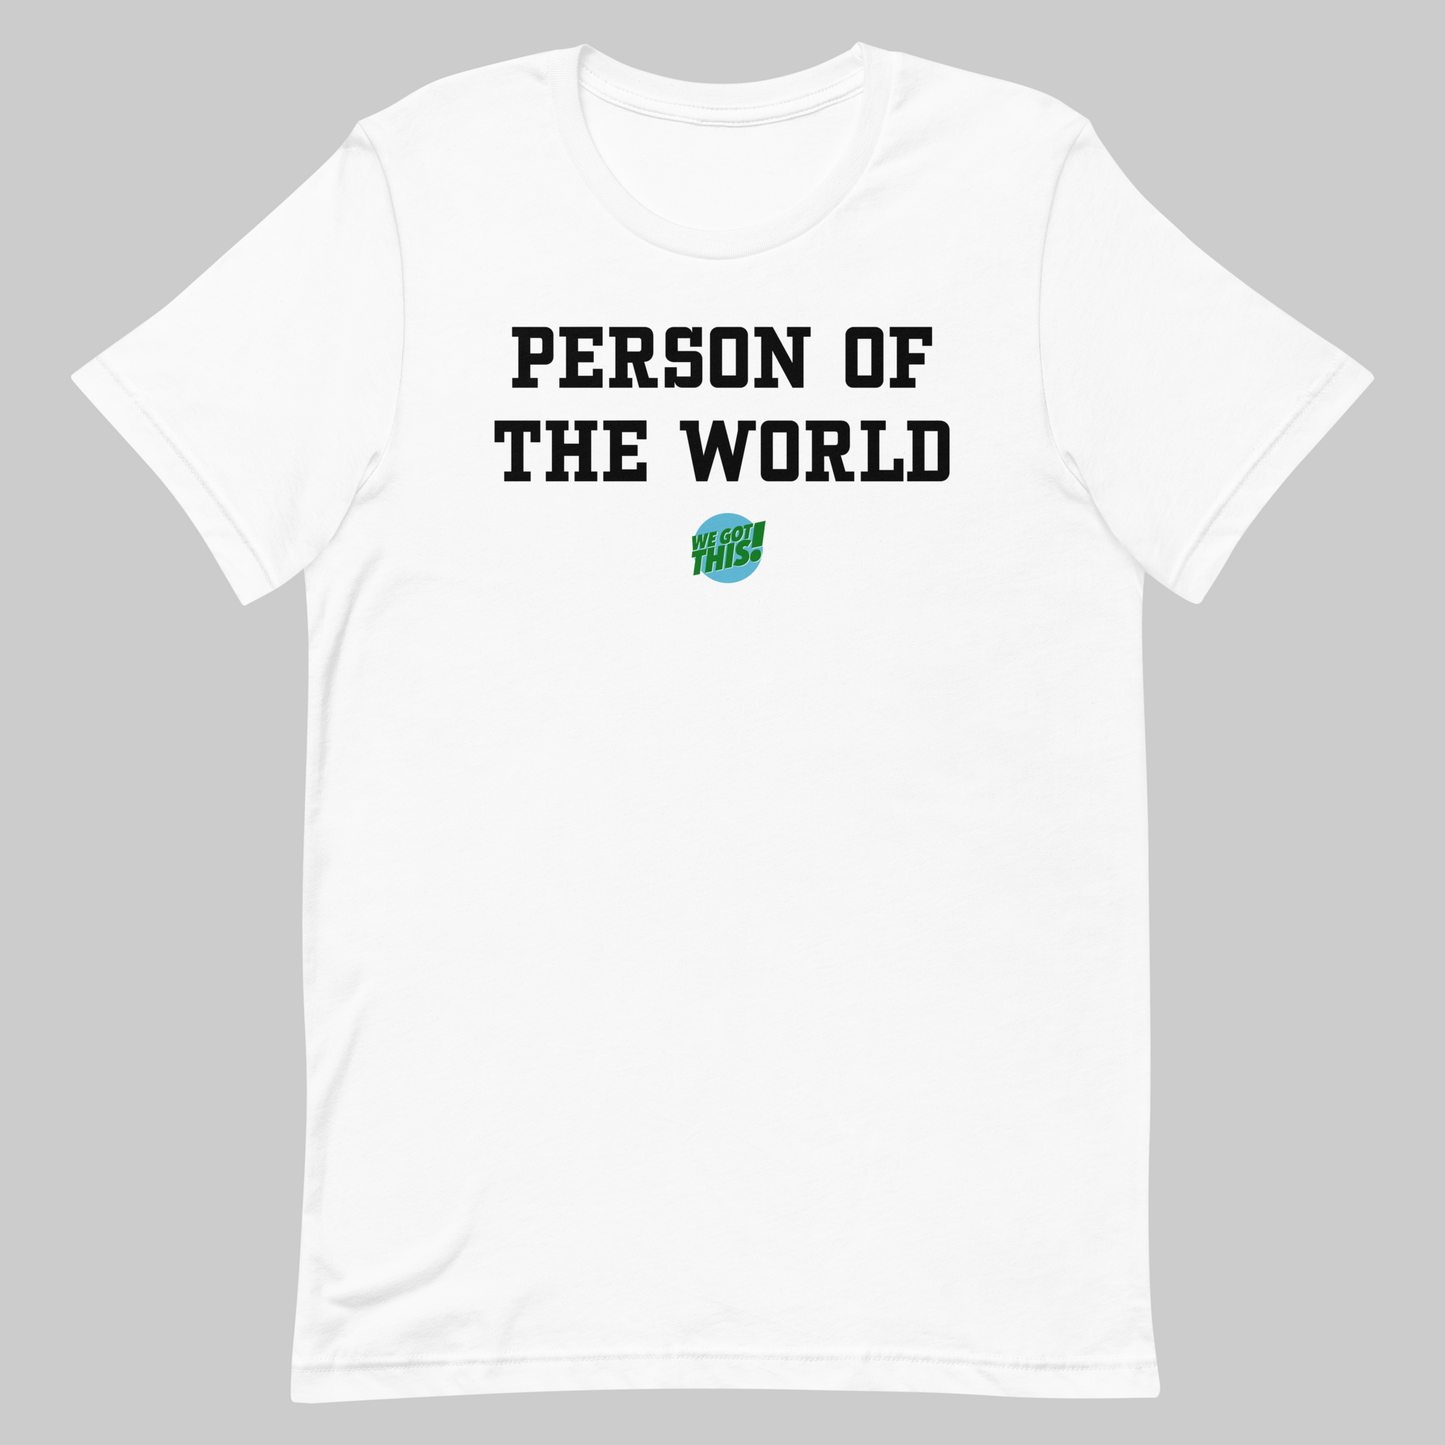 Person of the World T-shirt